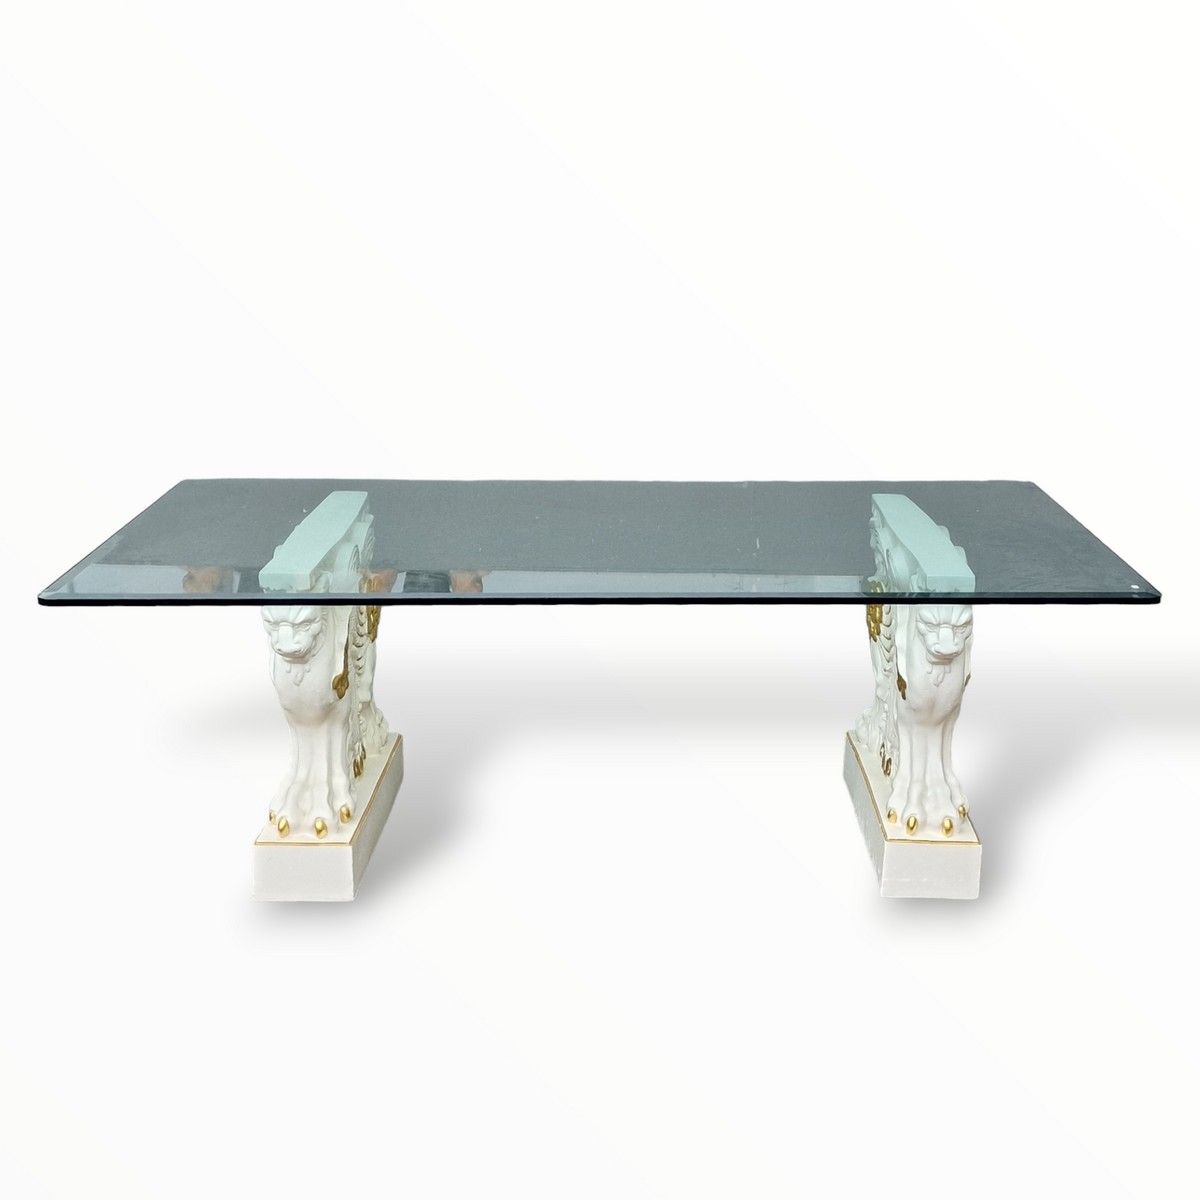 Null Modern Neoclassical-style DINING TABLE with beveled glass top and double ba&hellip;